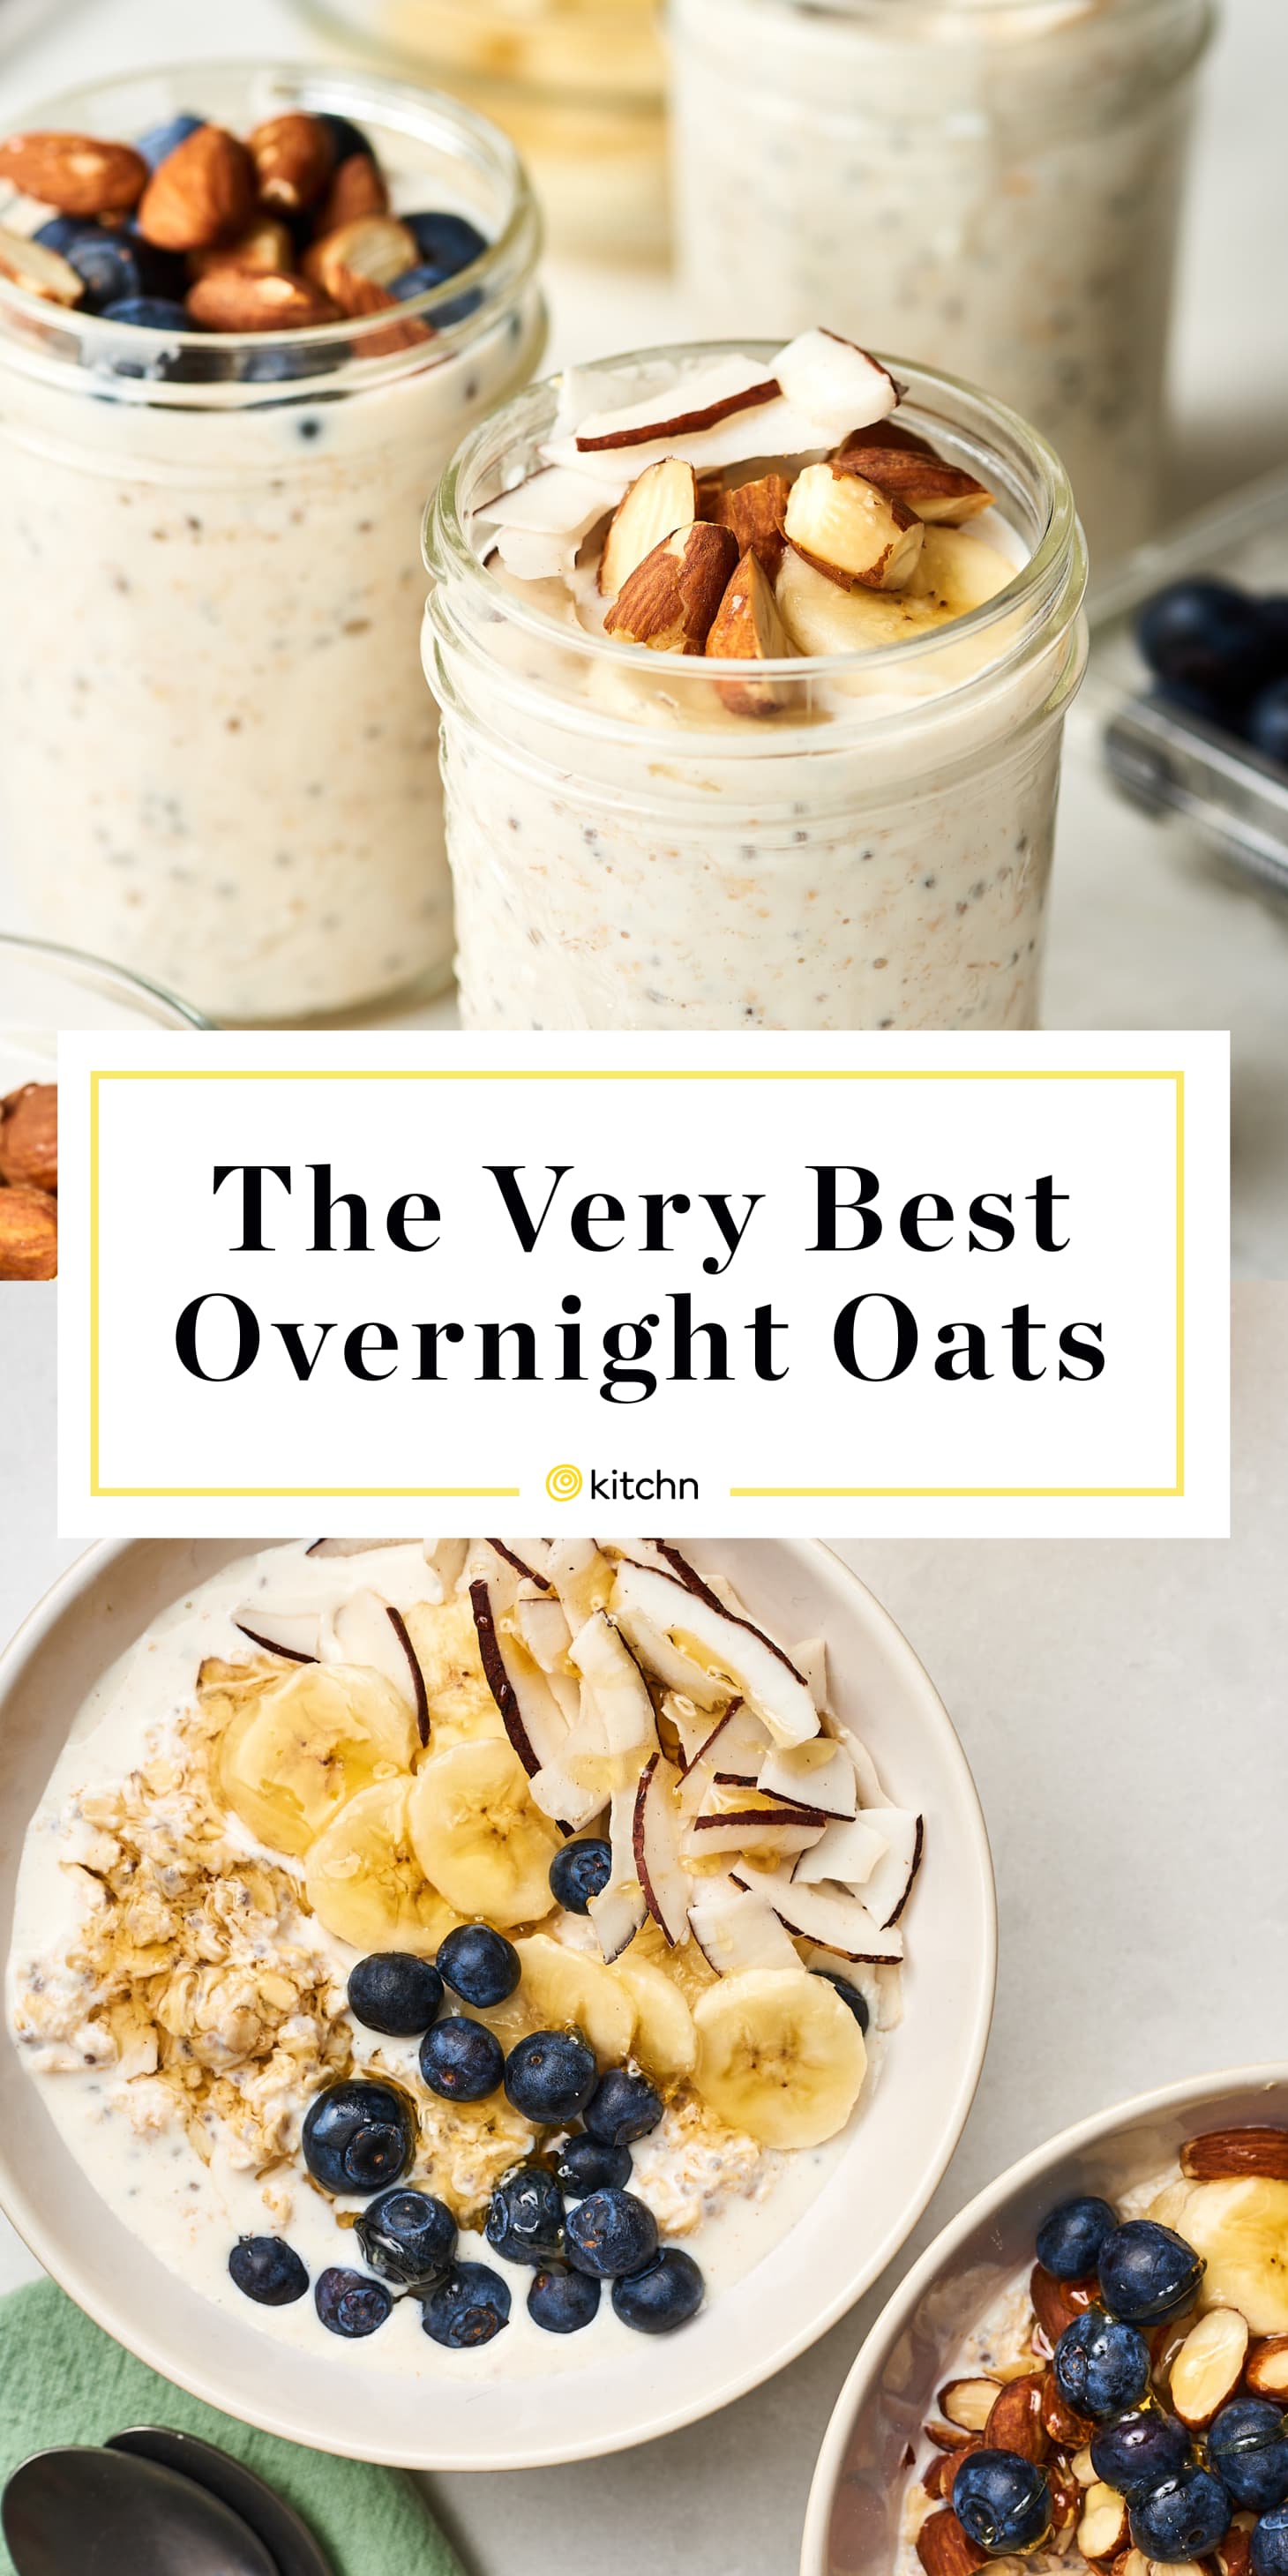 How to Make the Best Overnight Oats | Kitchn